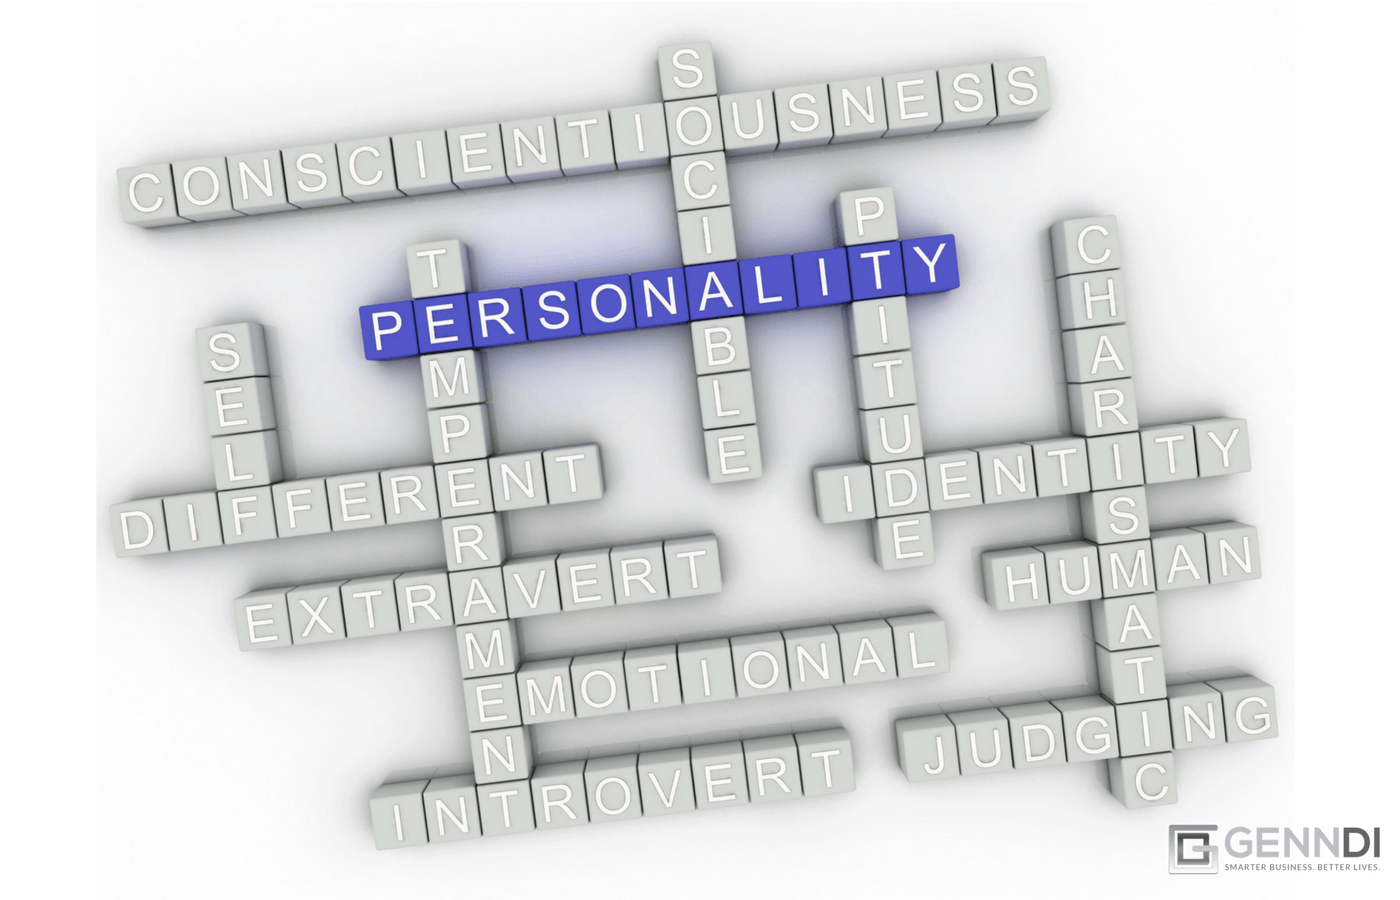 How do you define a Winning Personality?